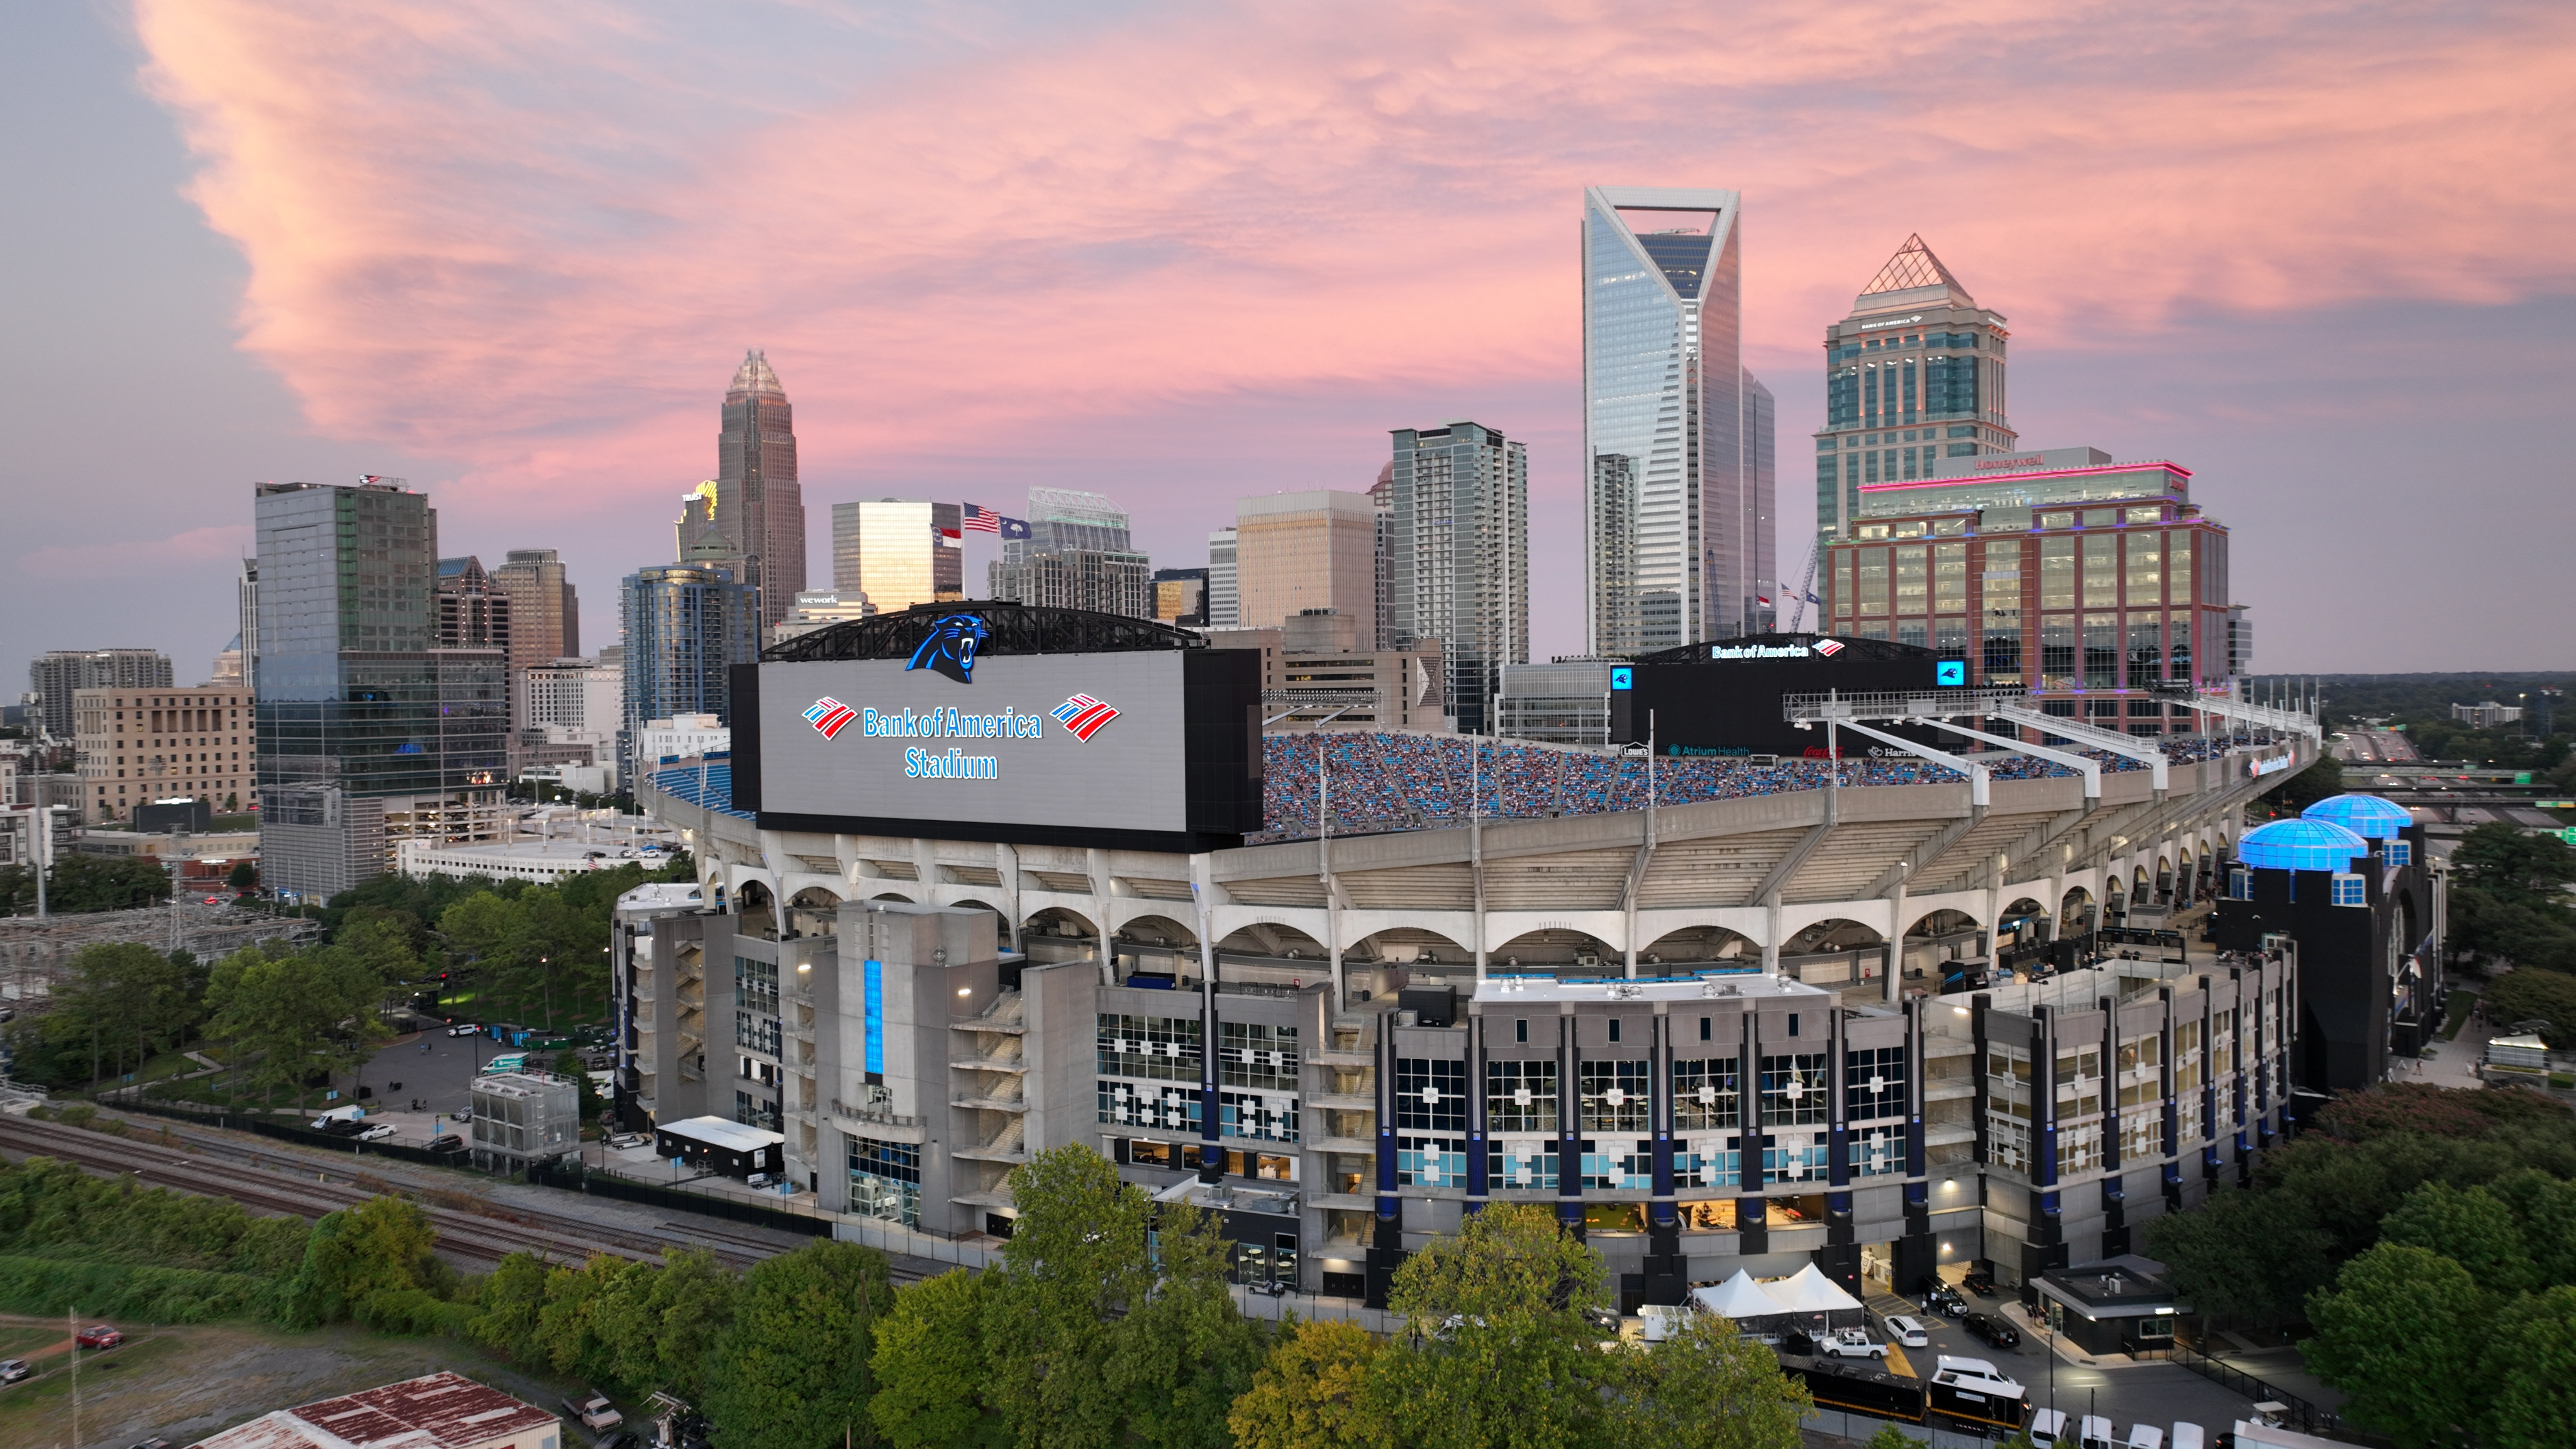 The Image for Bank Of America Stadium